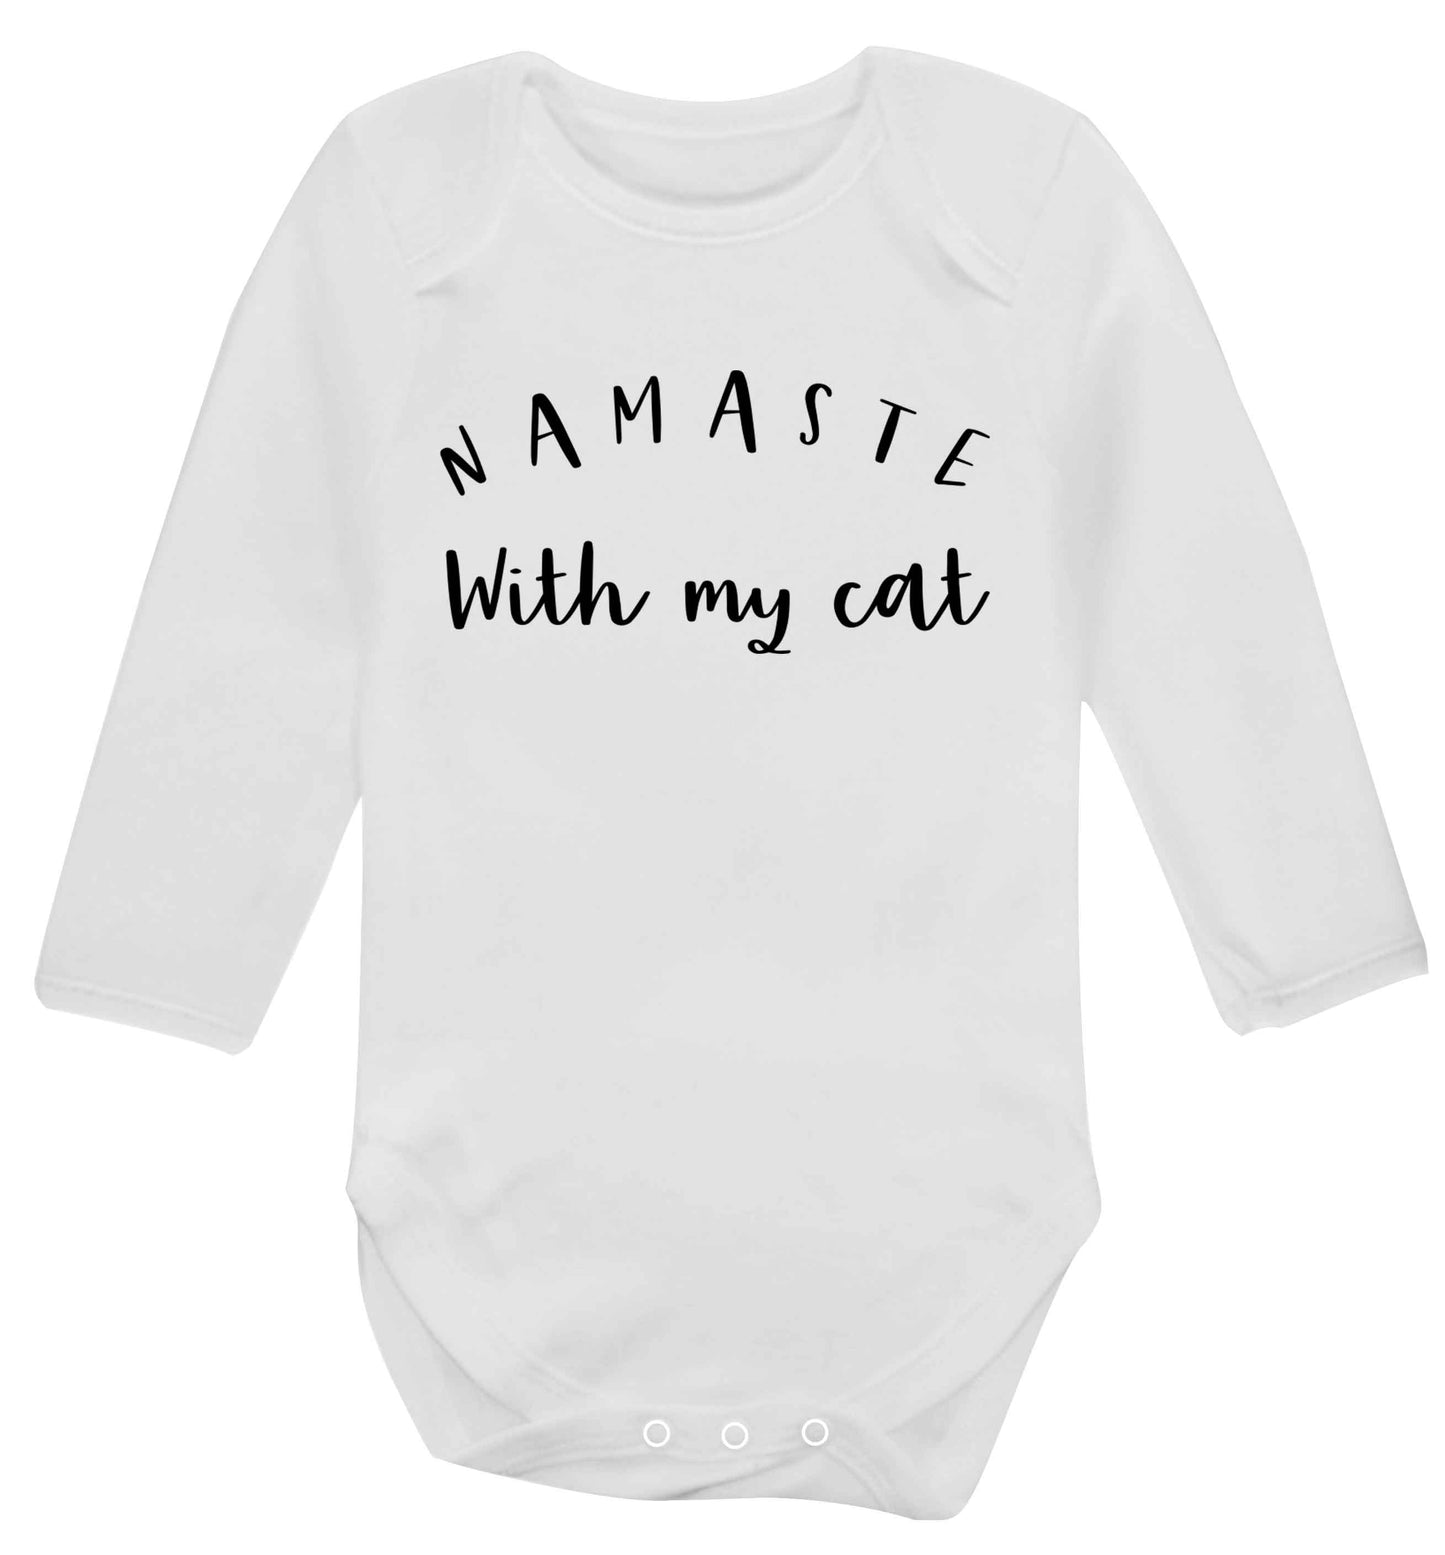 Namaste with my cat Baby Vest long sleeved white 6-12 months